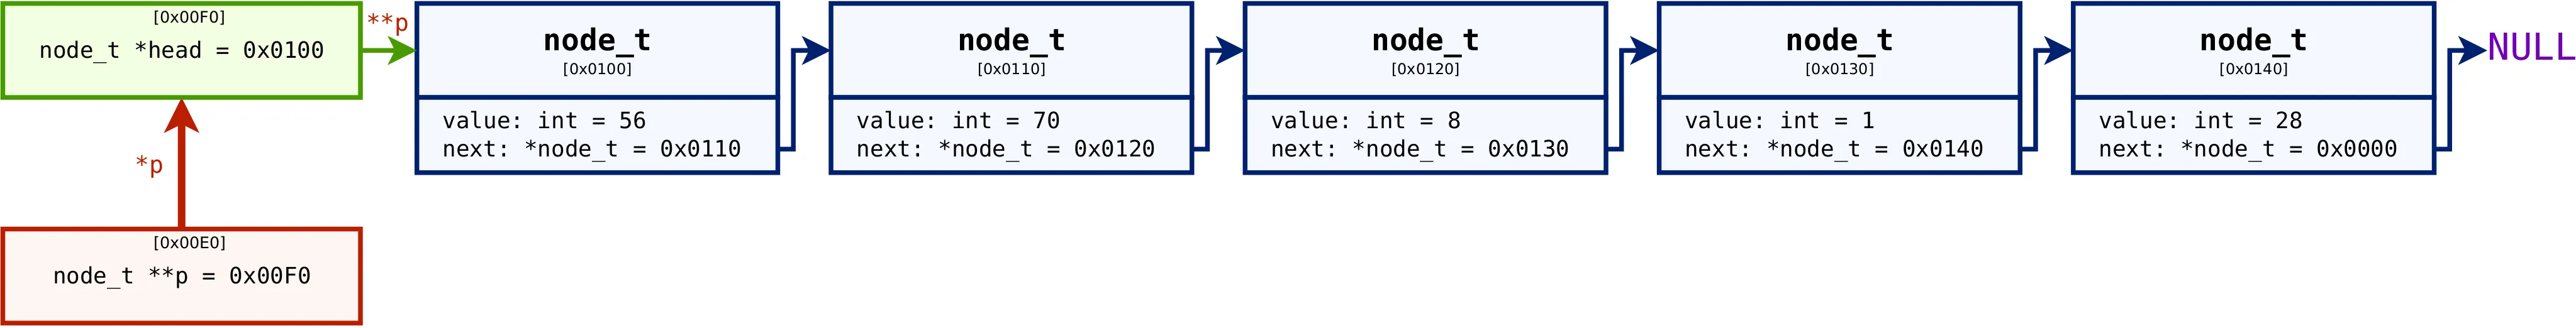 Singly-linked list example #2